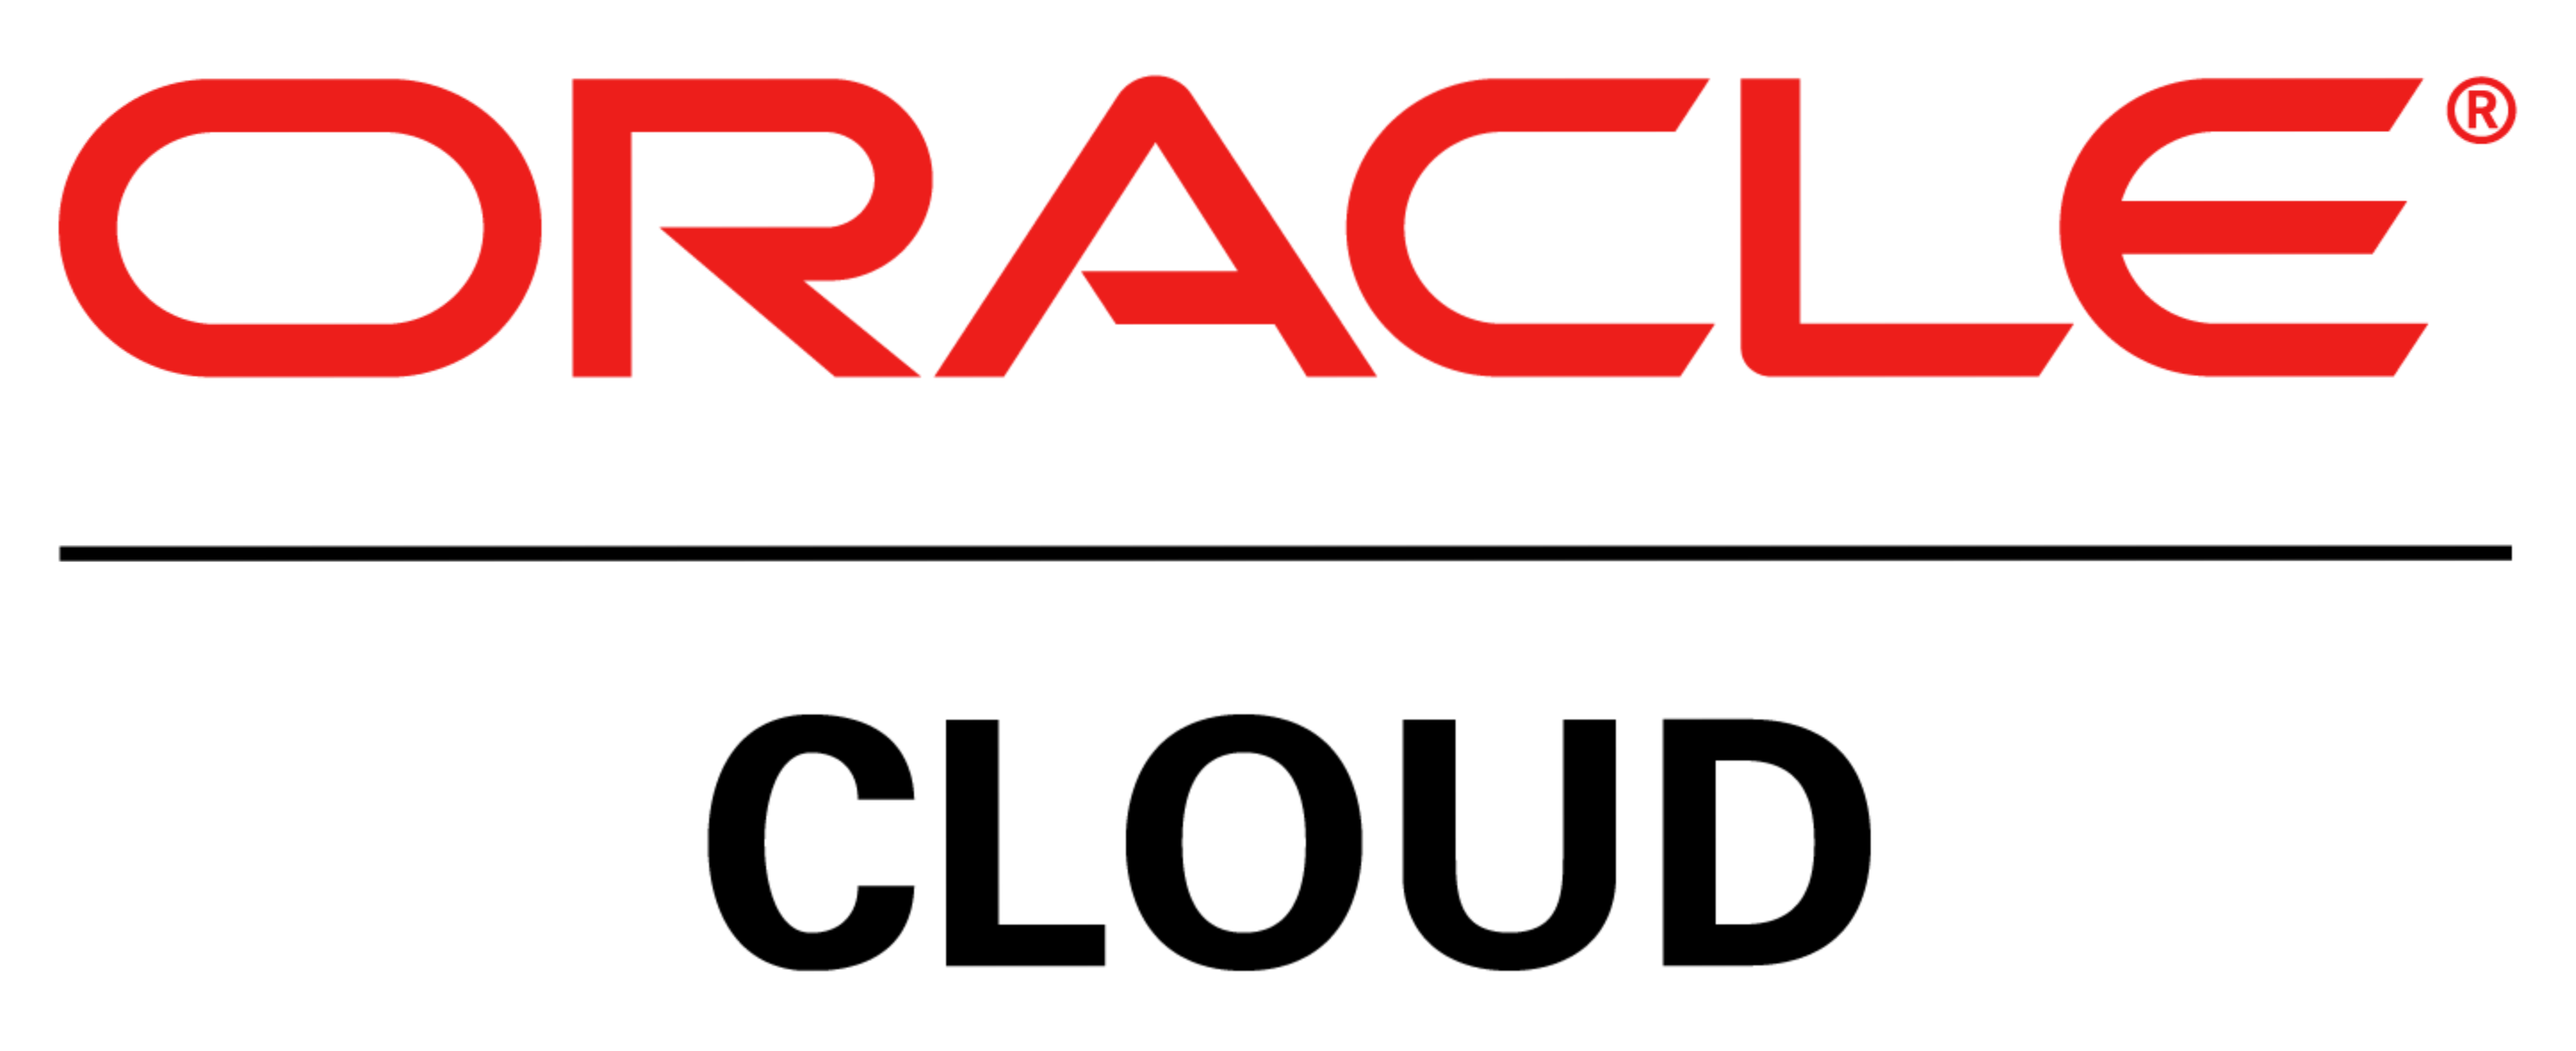 Oracle Cloud Infrastructure Logo